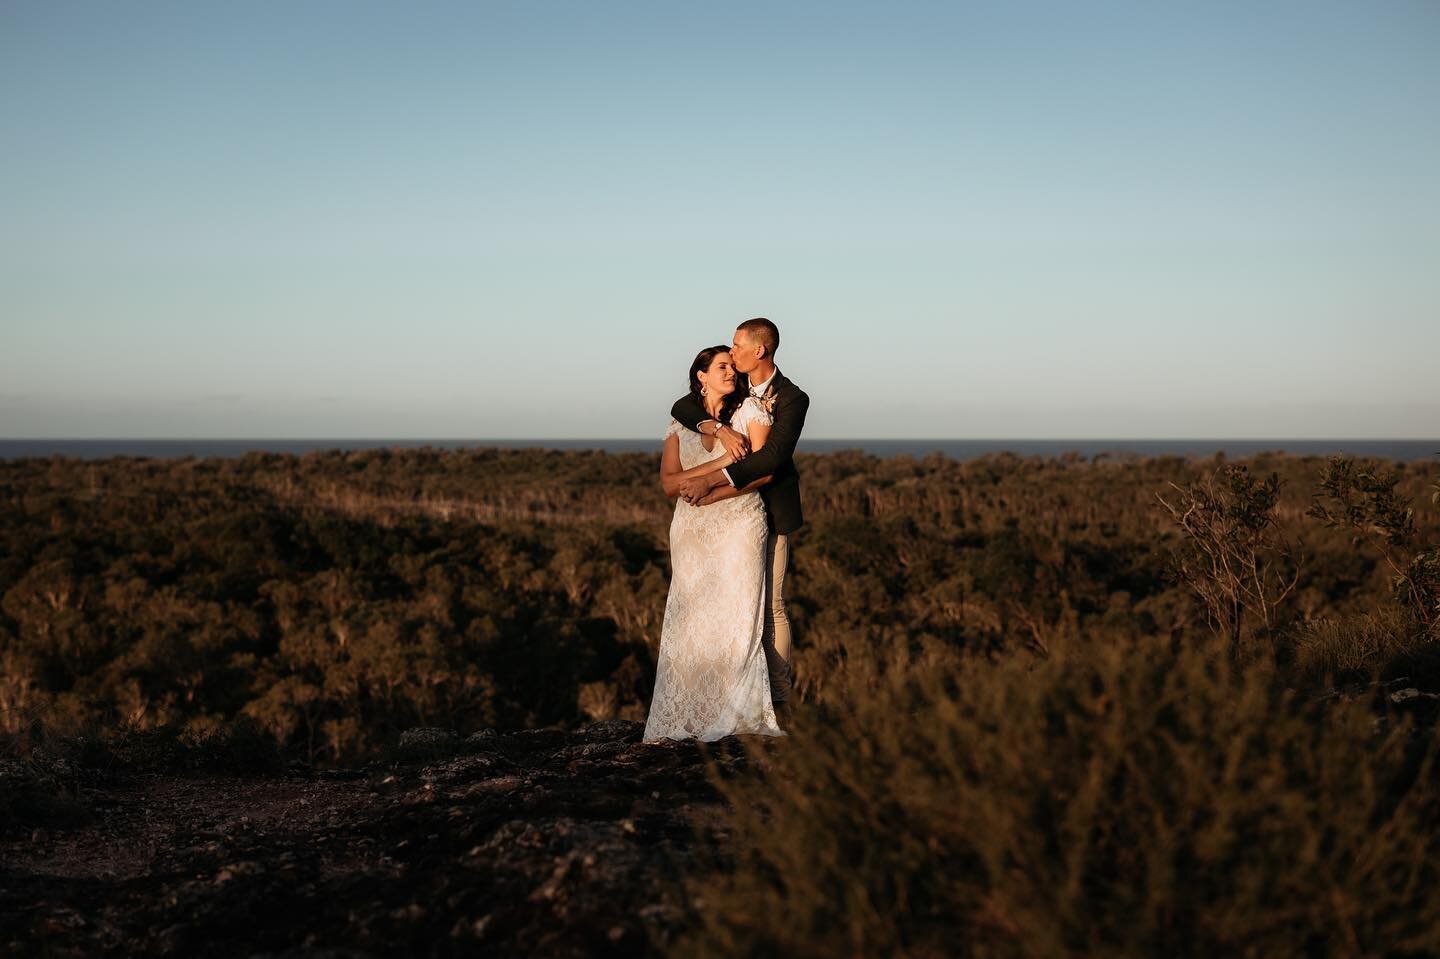 &bull; Kylie + Morgan 

These guys are still waiting patiently to be featured on the blog. 
I know because Kylie threatened me on the side of a mountain that she better make the blog 😂😂 
The wedding is definitely coming up because the world needs t